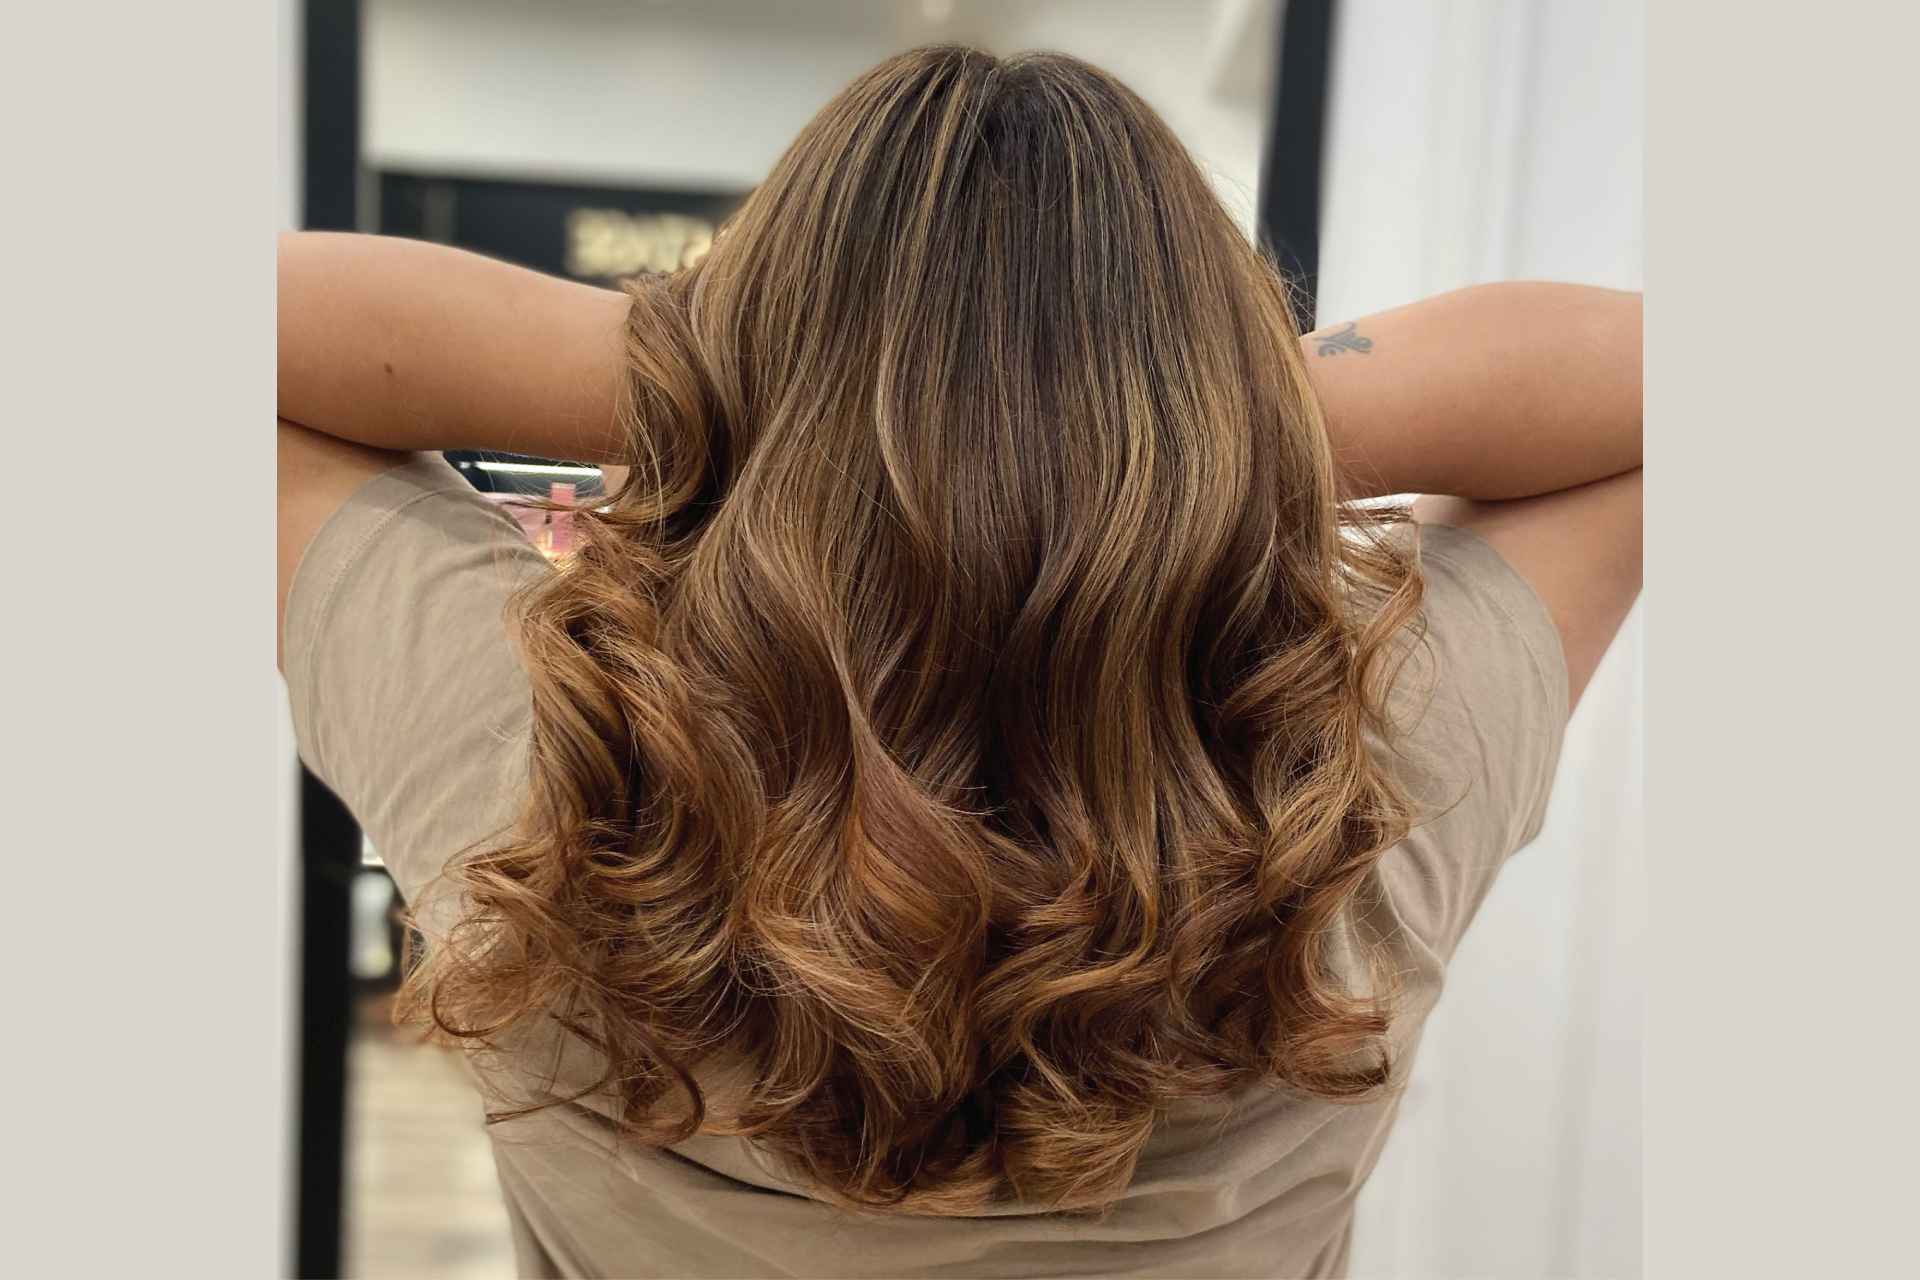 Blog Everything You Need to Know about Balayage Hair Colour before Your Next Salon Visit 1